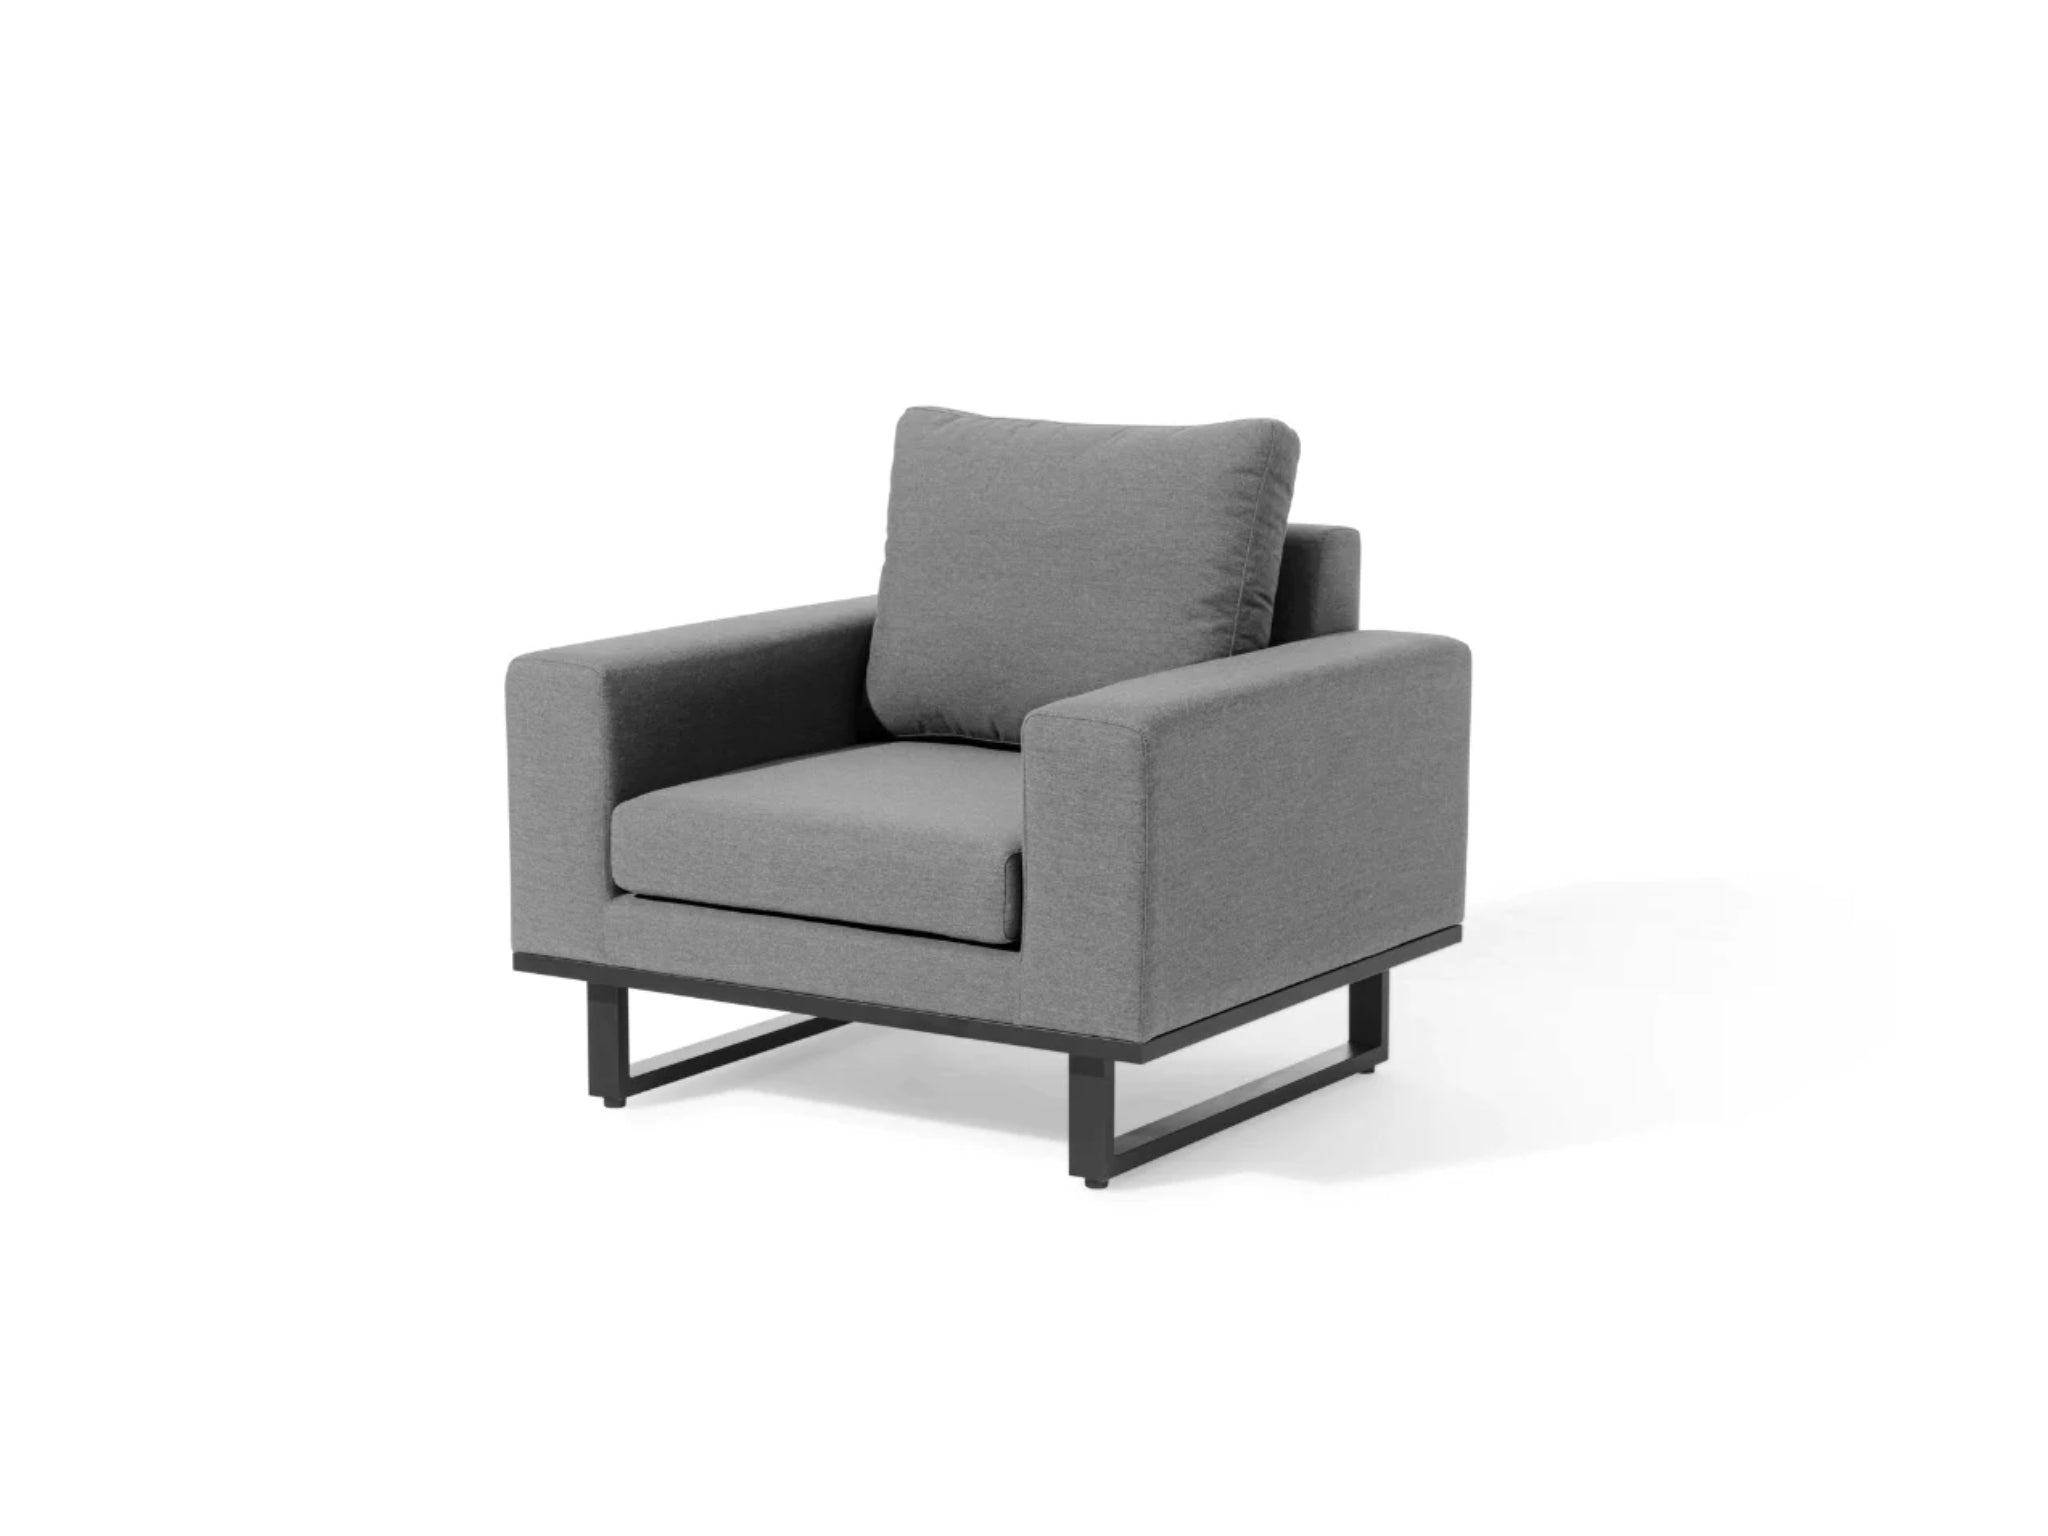 SIMPO by Sunlongarden Ethos Lounge Chair